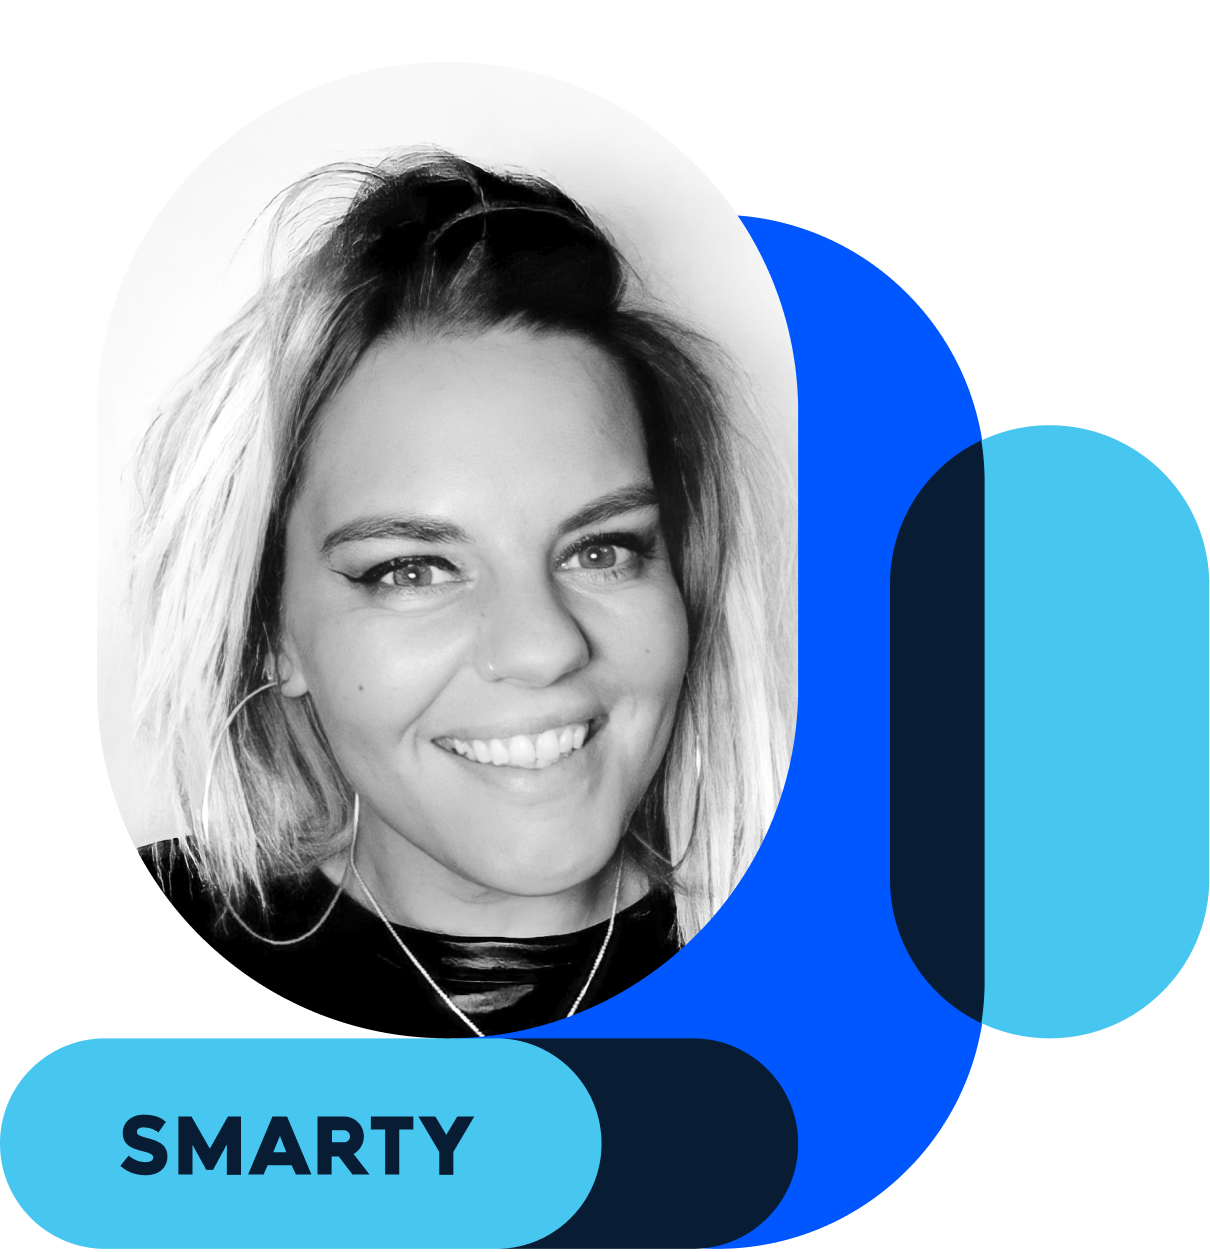 SMARTY reduced their median first-response time by 99% with Intercom